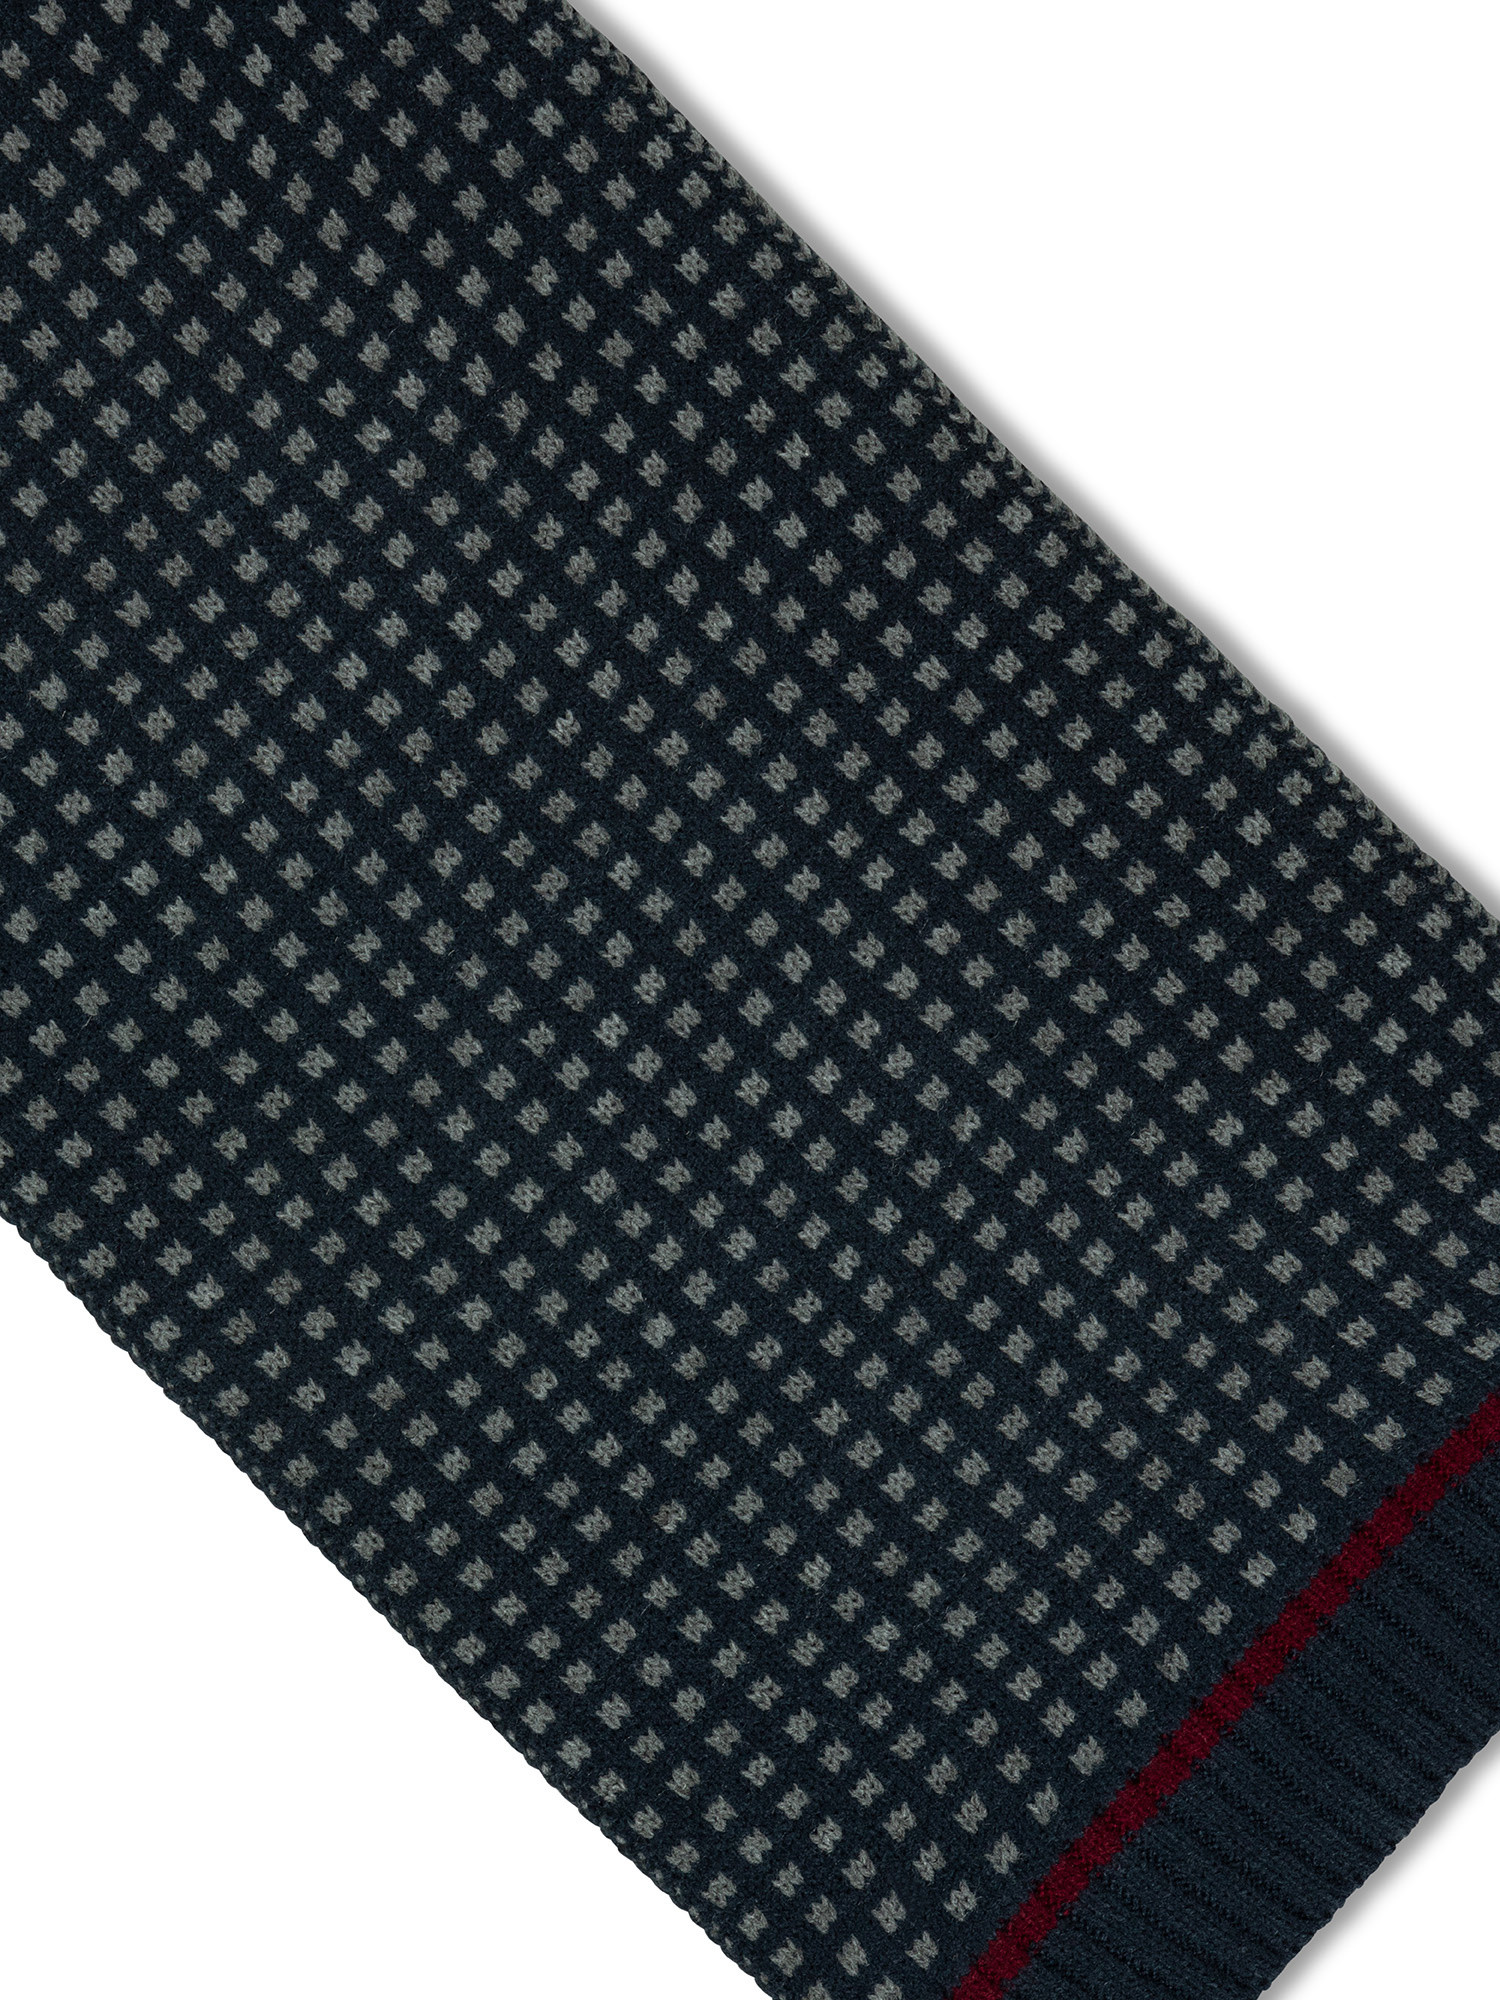 Luca D'Altieri - Checked scarf, Dark Blue, large image number 1